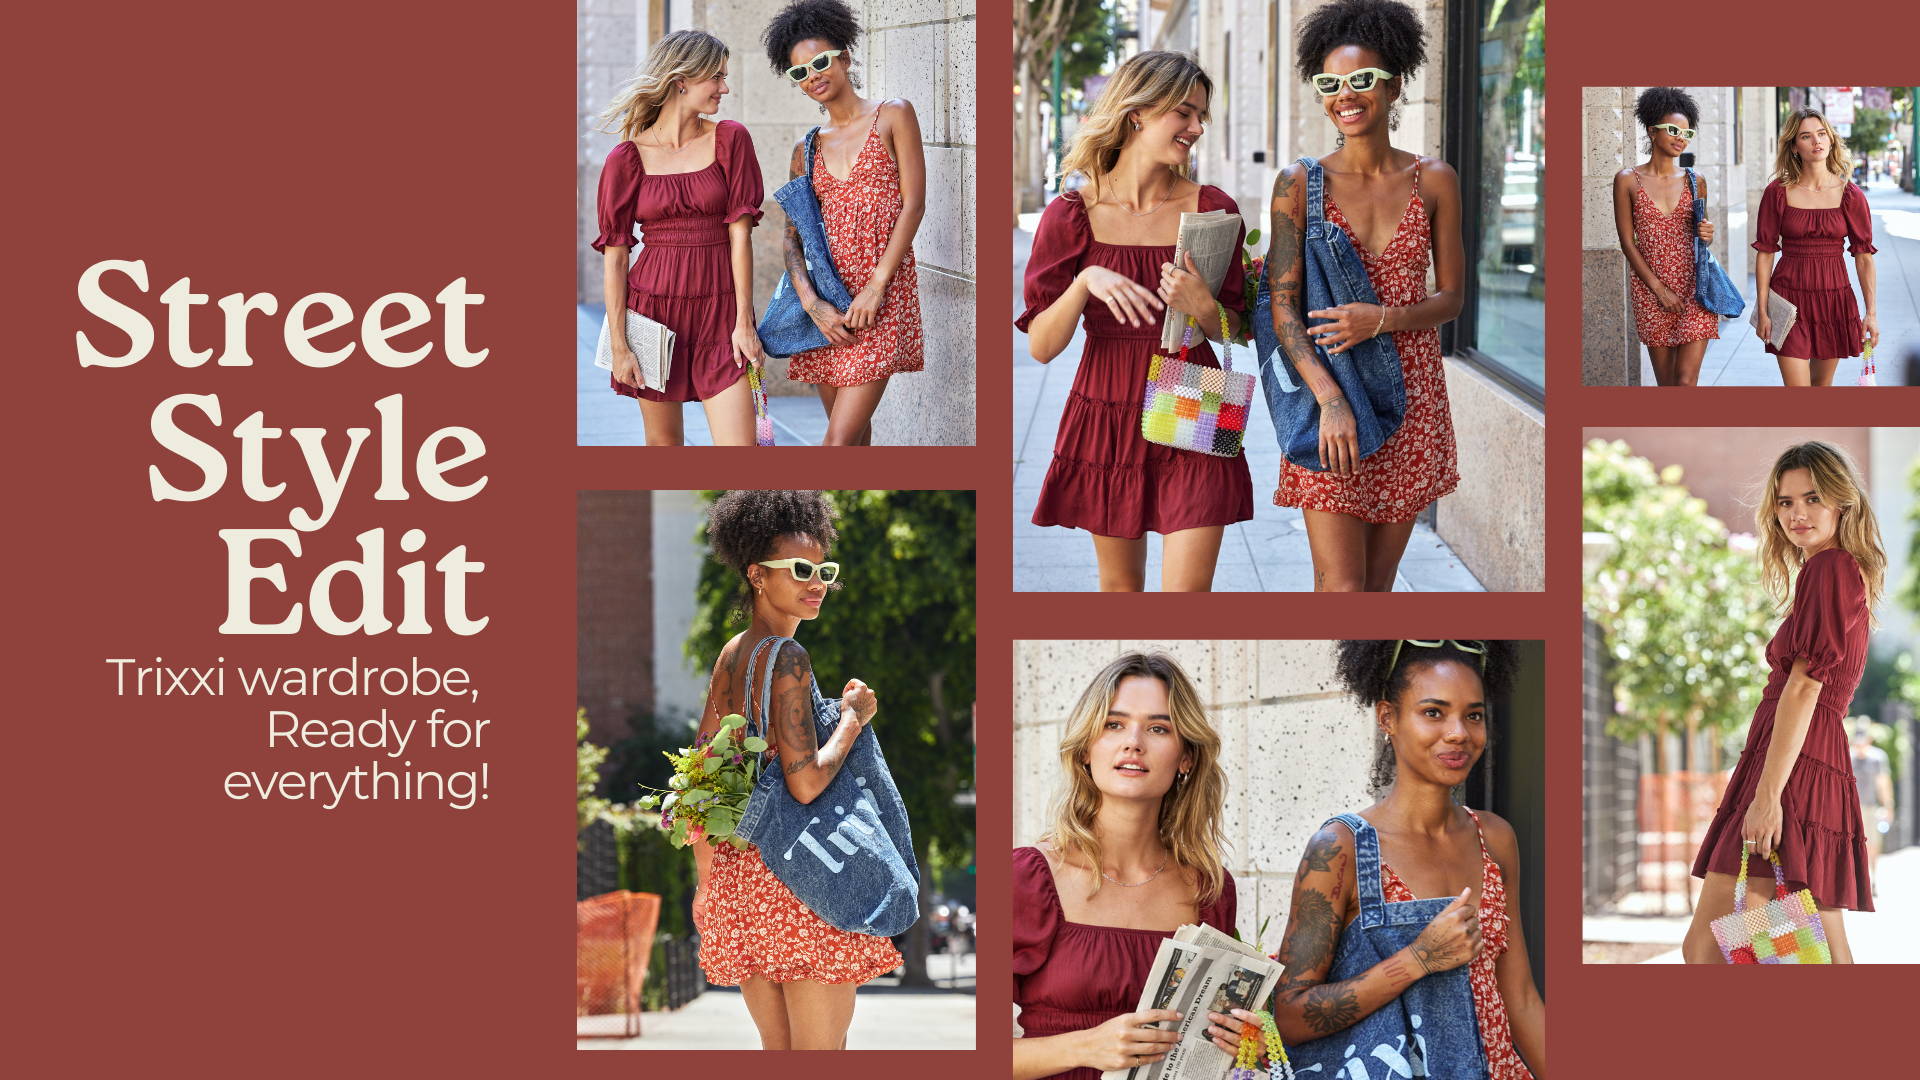 Street style edit, trixxi wardrobe ready for everything- girls walking in the sunny city in a maroon ruffle tier mini dress and red with white floral printed strappy tank dress. 